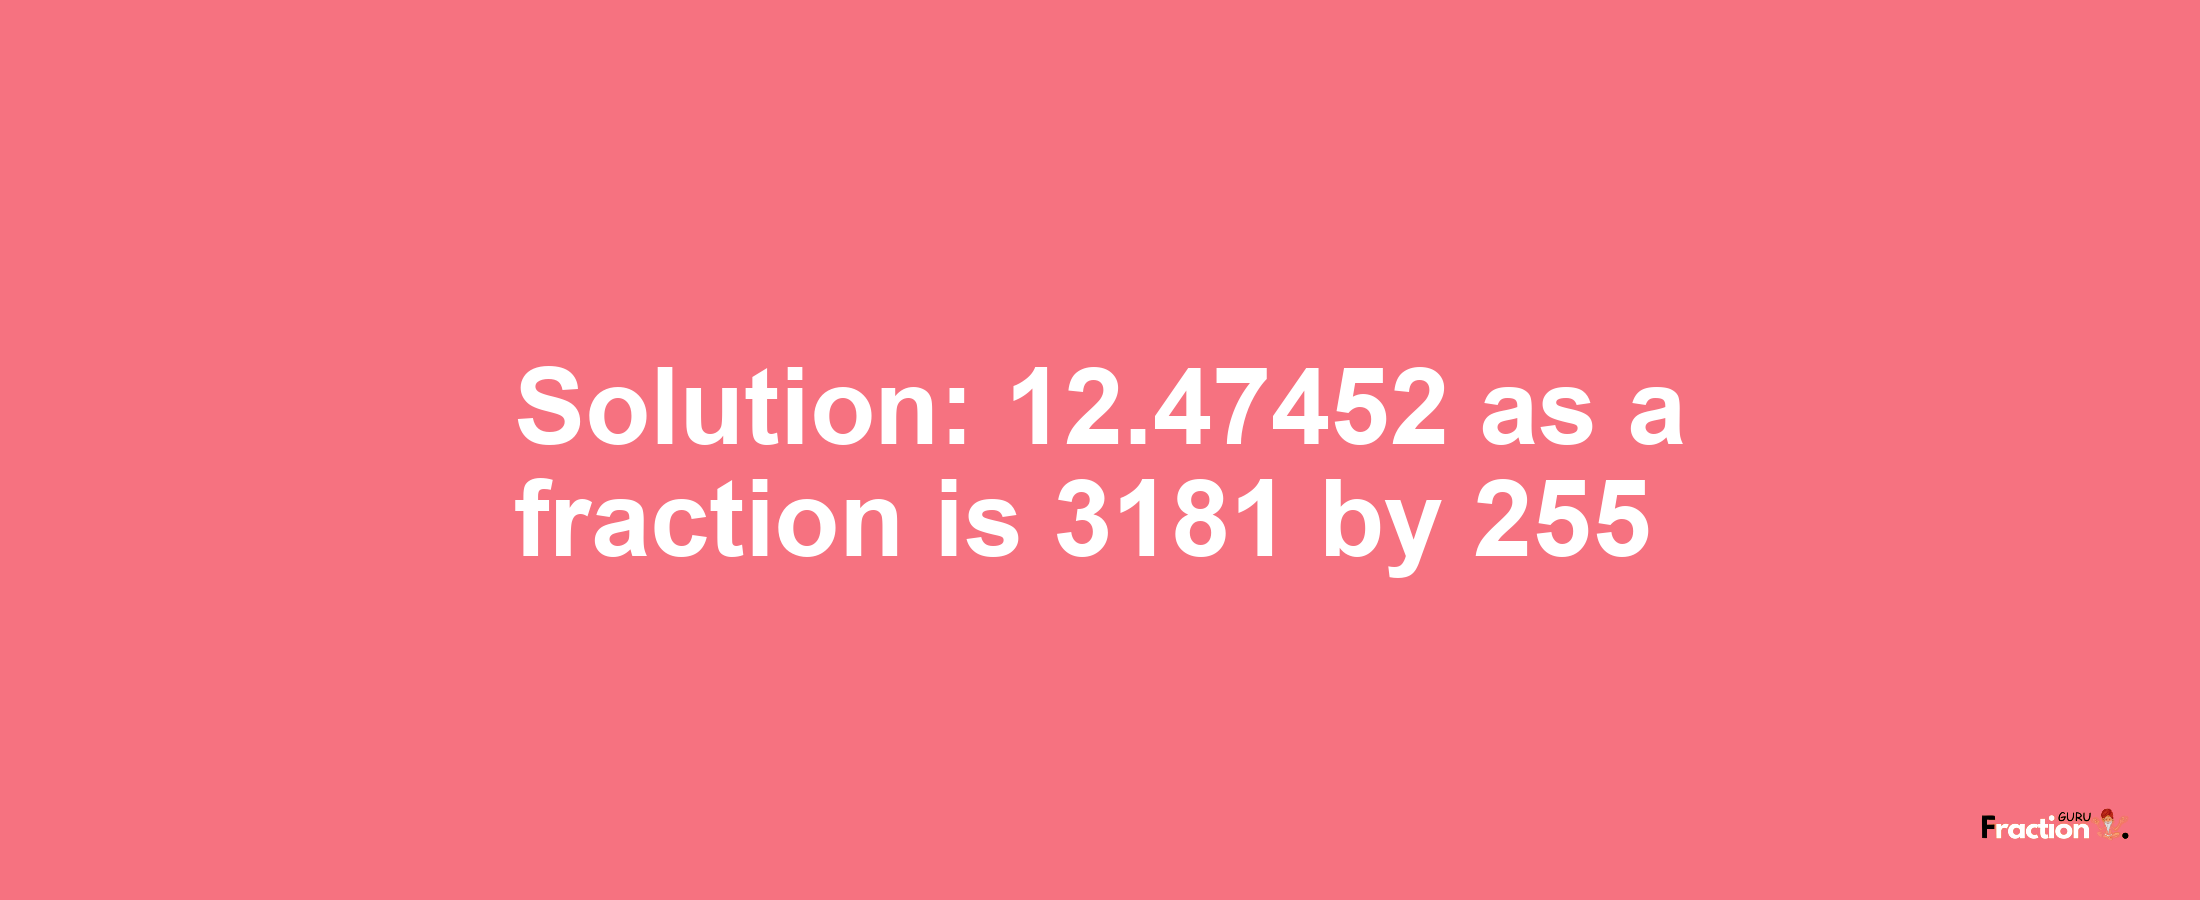 Solution:12.47452 as a fraction is 3181/255